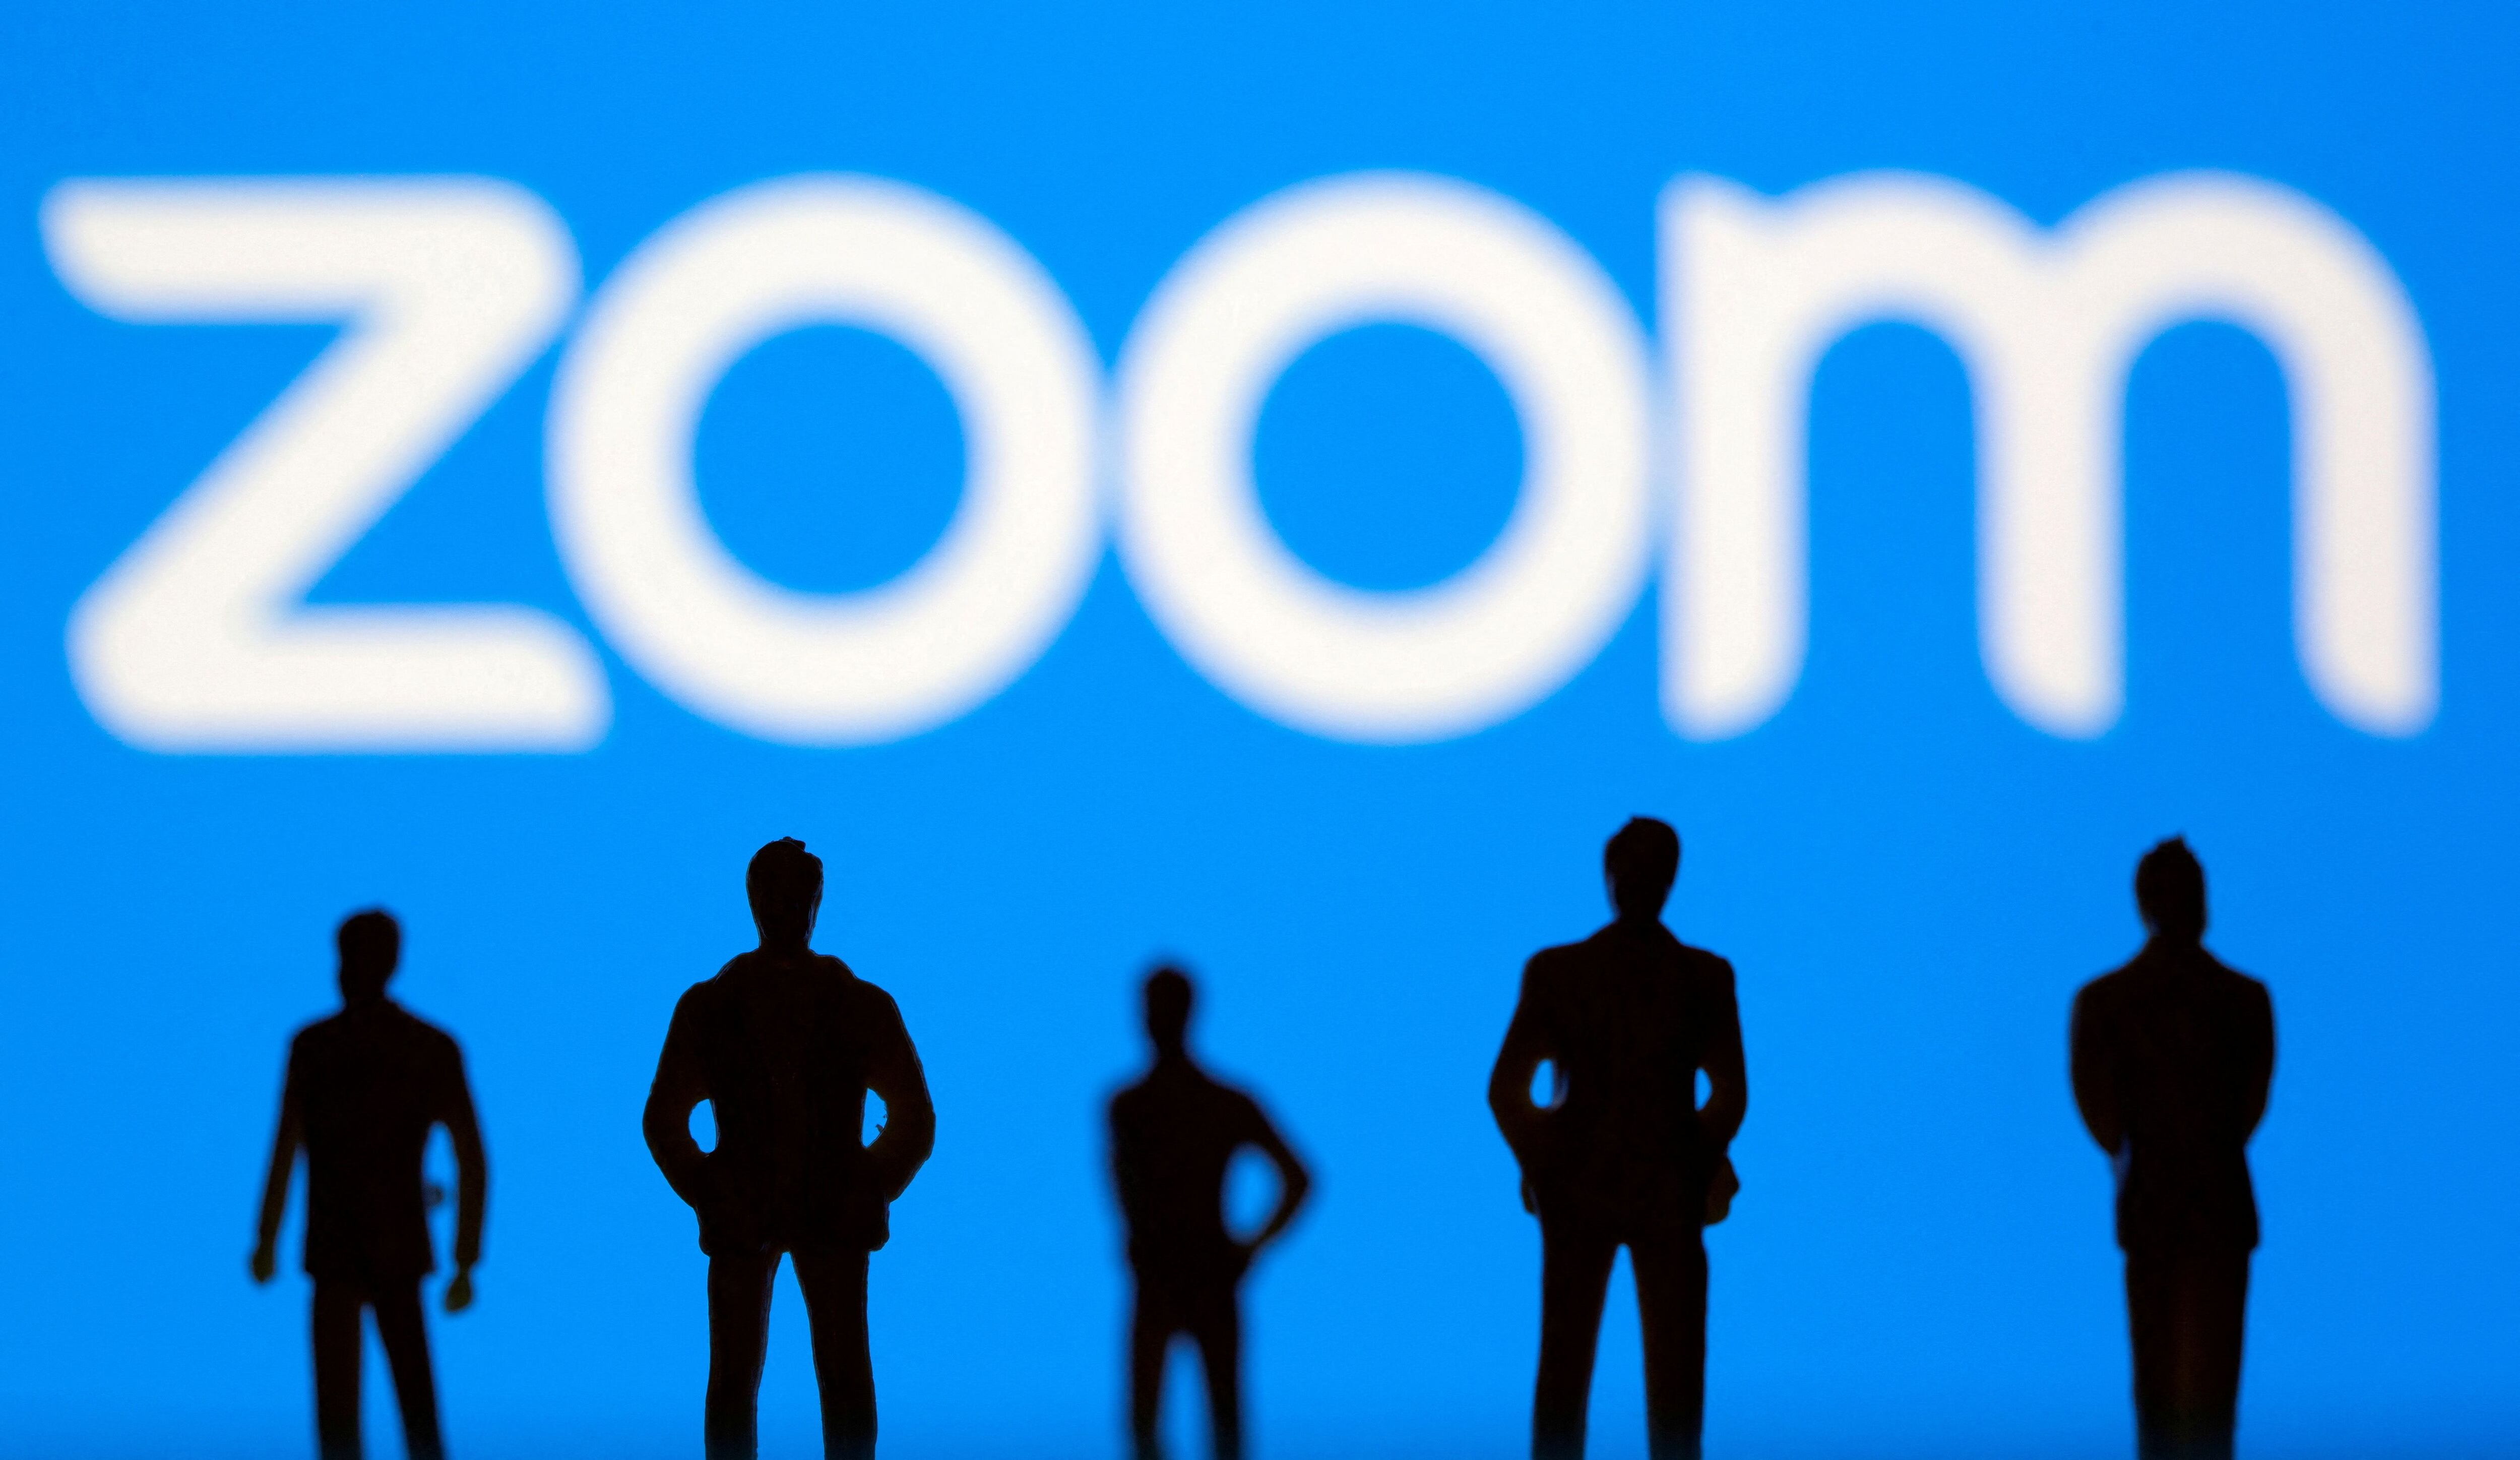 FILE PHOTO: Small toy figures are seen in front of Zoom logo in this illustration picture taken March 15, 2021. REUTERS/Dado Ruvic/Illustration/File Photo